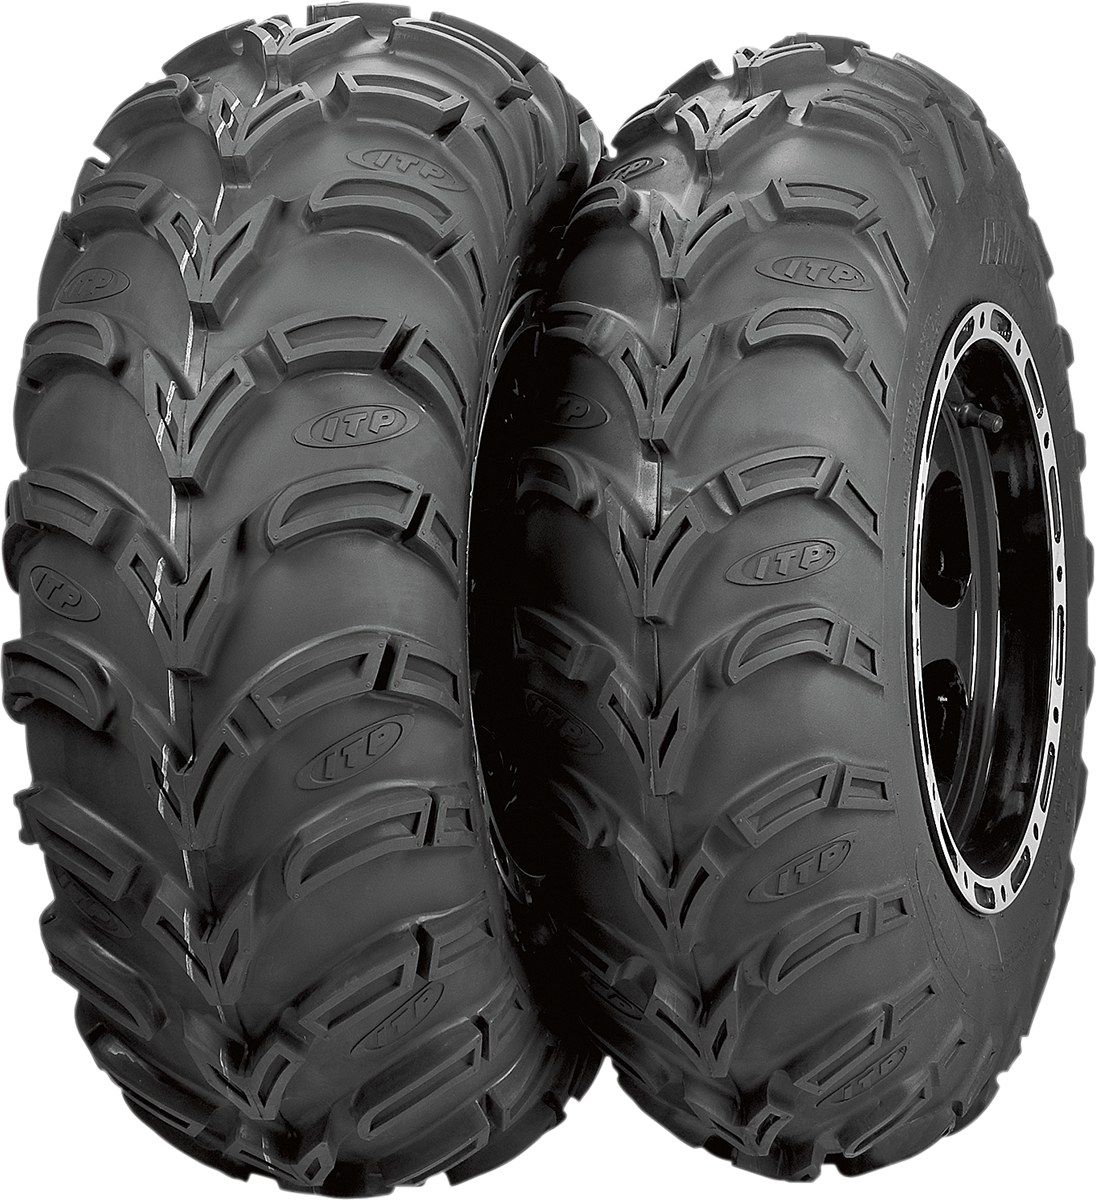 ITP Tire - Mud Lite XL - Front/Rear - 28x10-14 - 6 Ply 560494